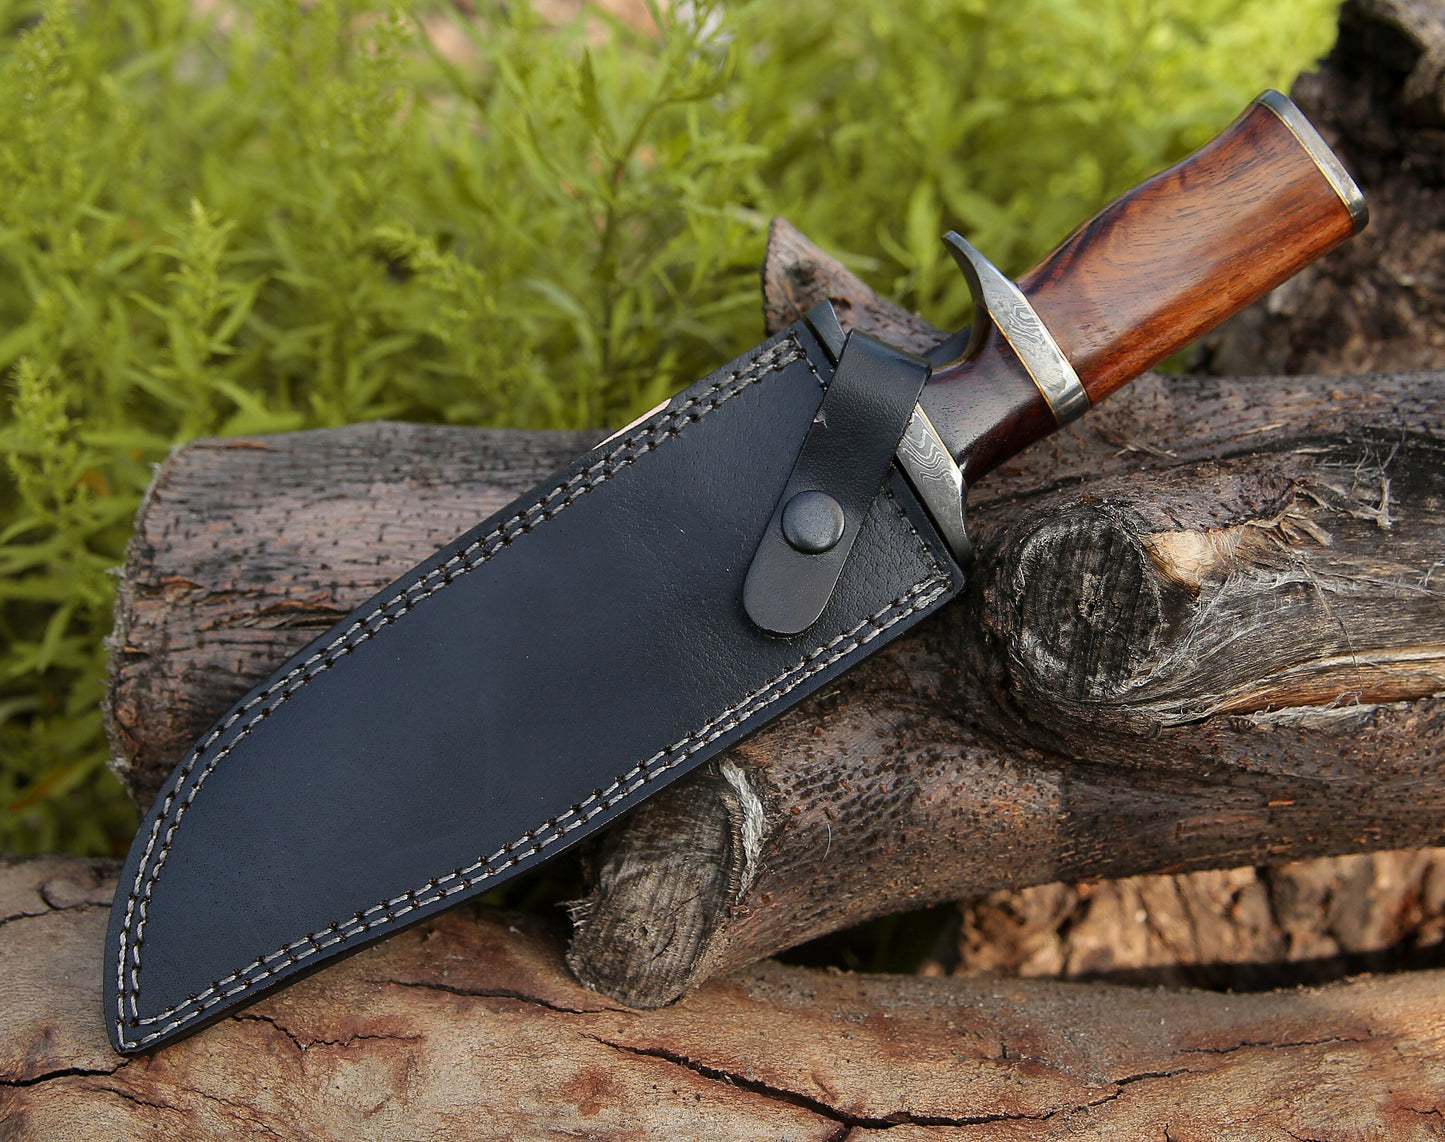 Handcrafted Damascus Steel Bowie Knife